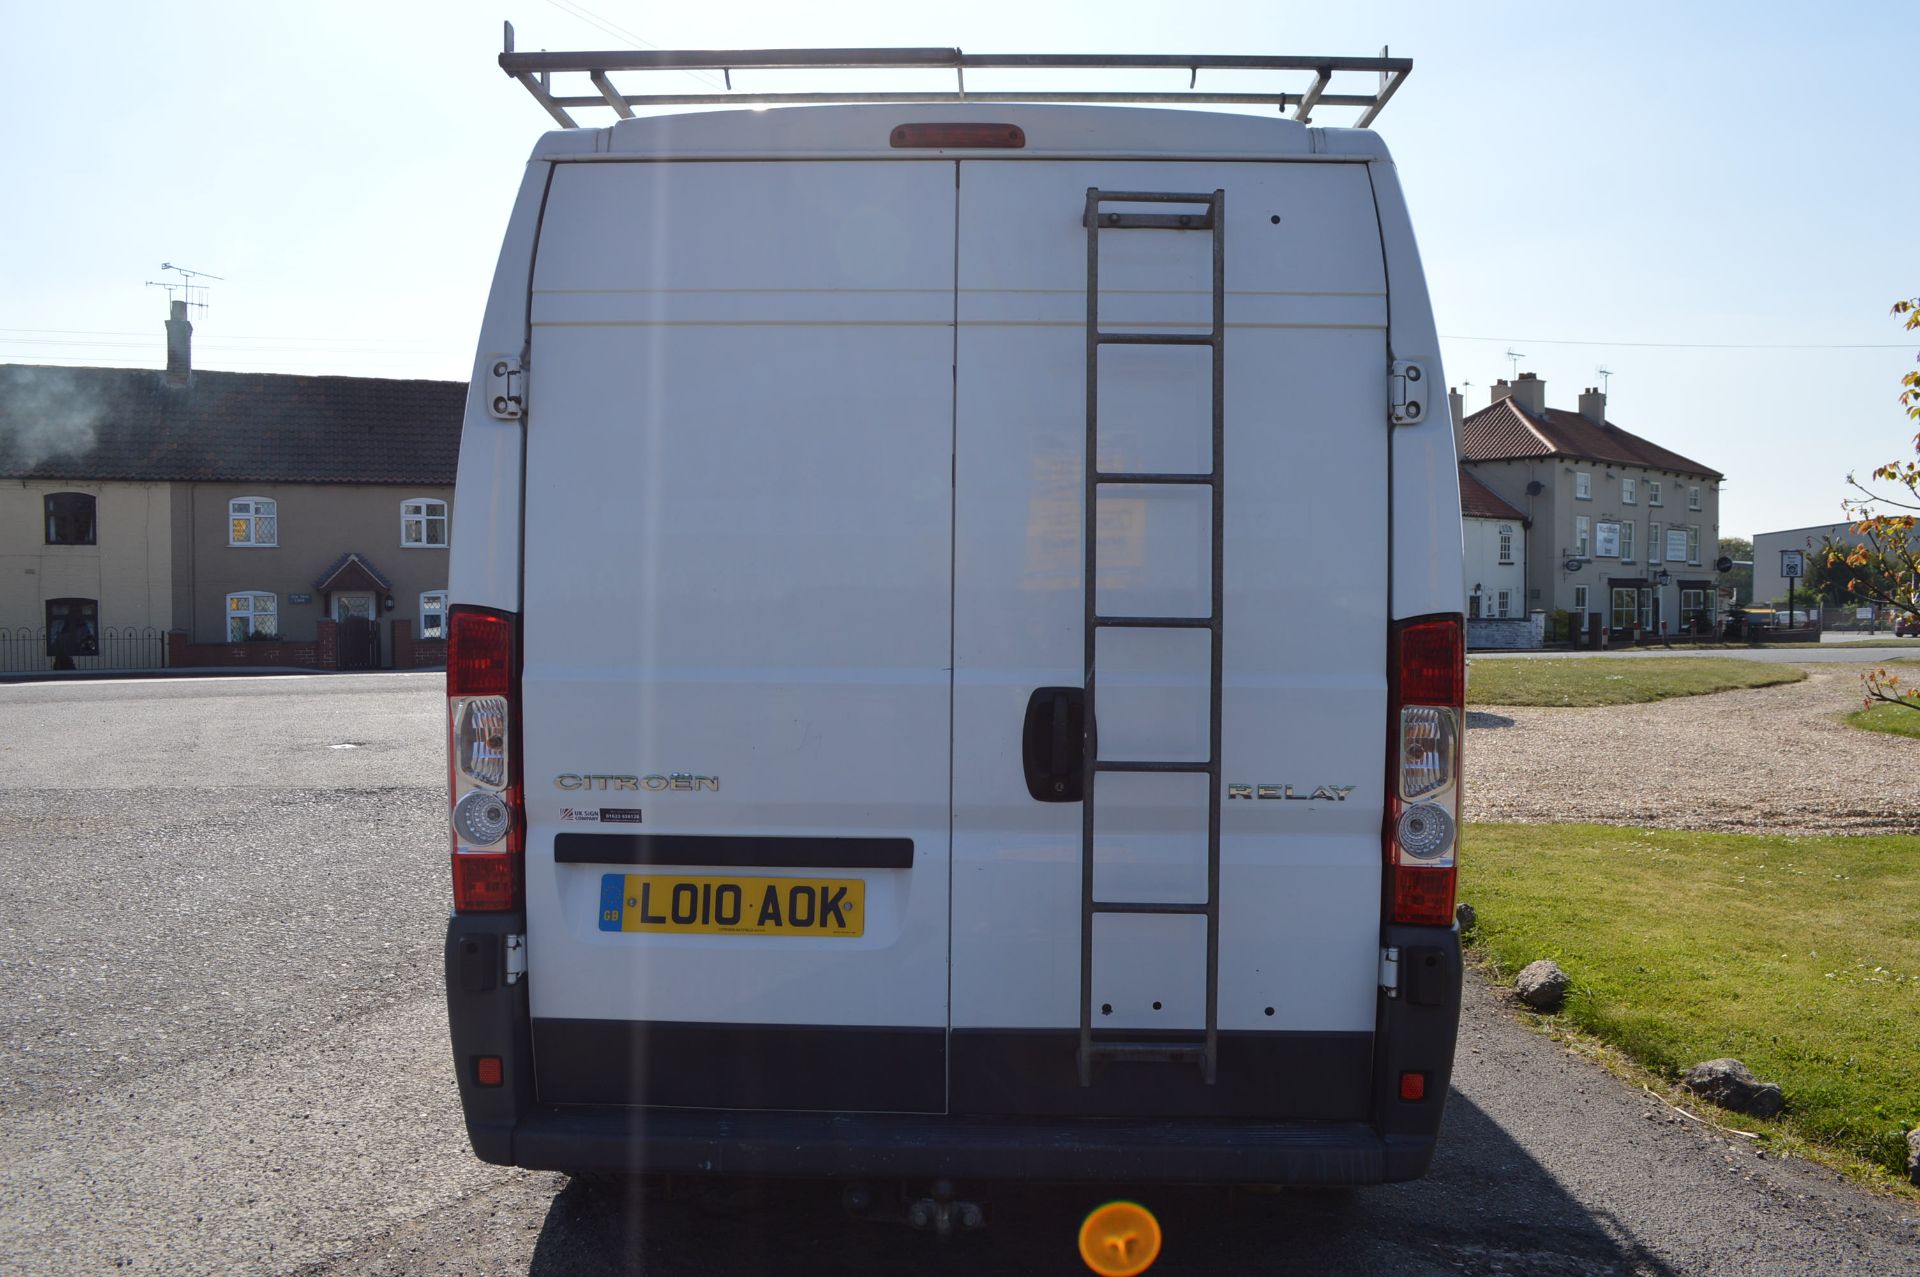 B - 2010/10 REG CITROEN RELAY 35 HDI 120 LWB, 2 FORMER KEEPERS   DATE OF REGISTRATION: 25TH AUGUST - Image 5 of 18